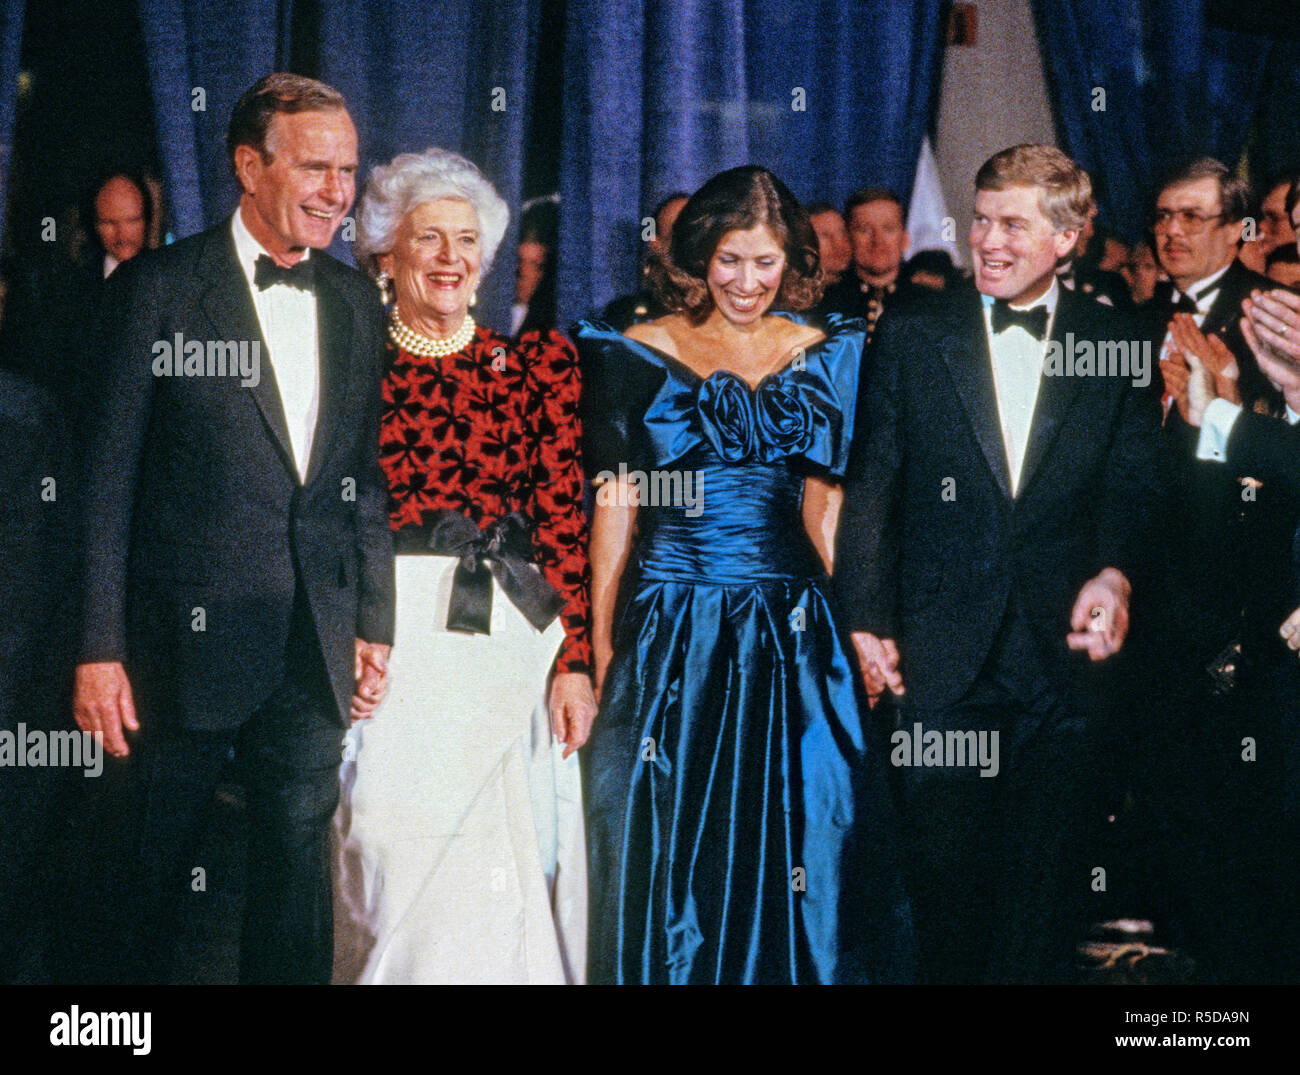 ***FILE PHOTO*** George H.W. Bush Has Passed Away From left to right: United States President-elect George H.W. Bush, Barbara Bush, Marilyn Quayle, and US Vice President-elect Dan Quayle, attends the Inaugural Gala at the Washington DC Convention Center in Washington, DC on January 18 1989. Credit: David Burnett/Pool via CNP /MediaPunch Credit: MediaPunch Inc/Alamy Live News Stock Photo